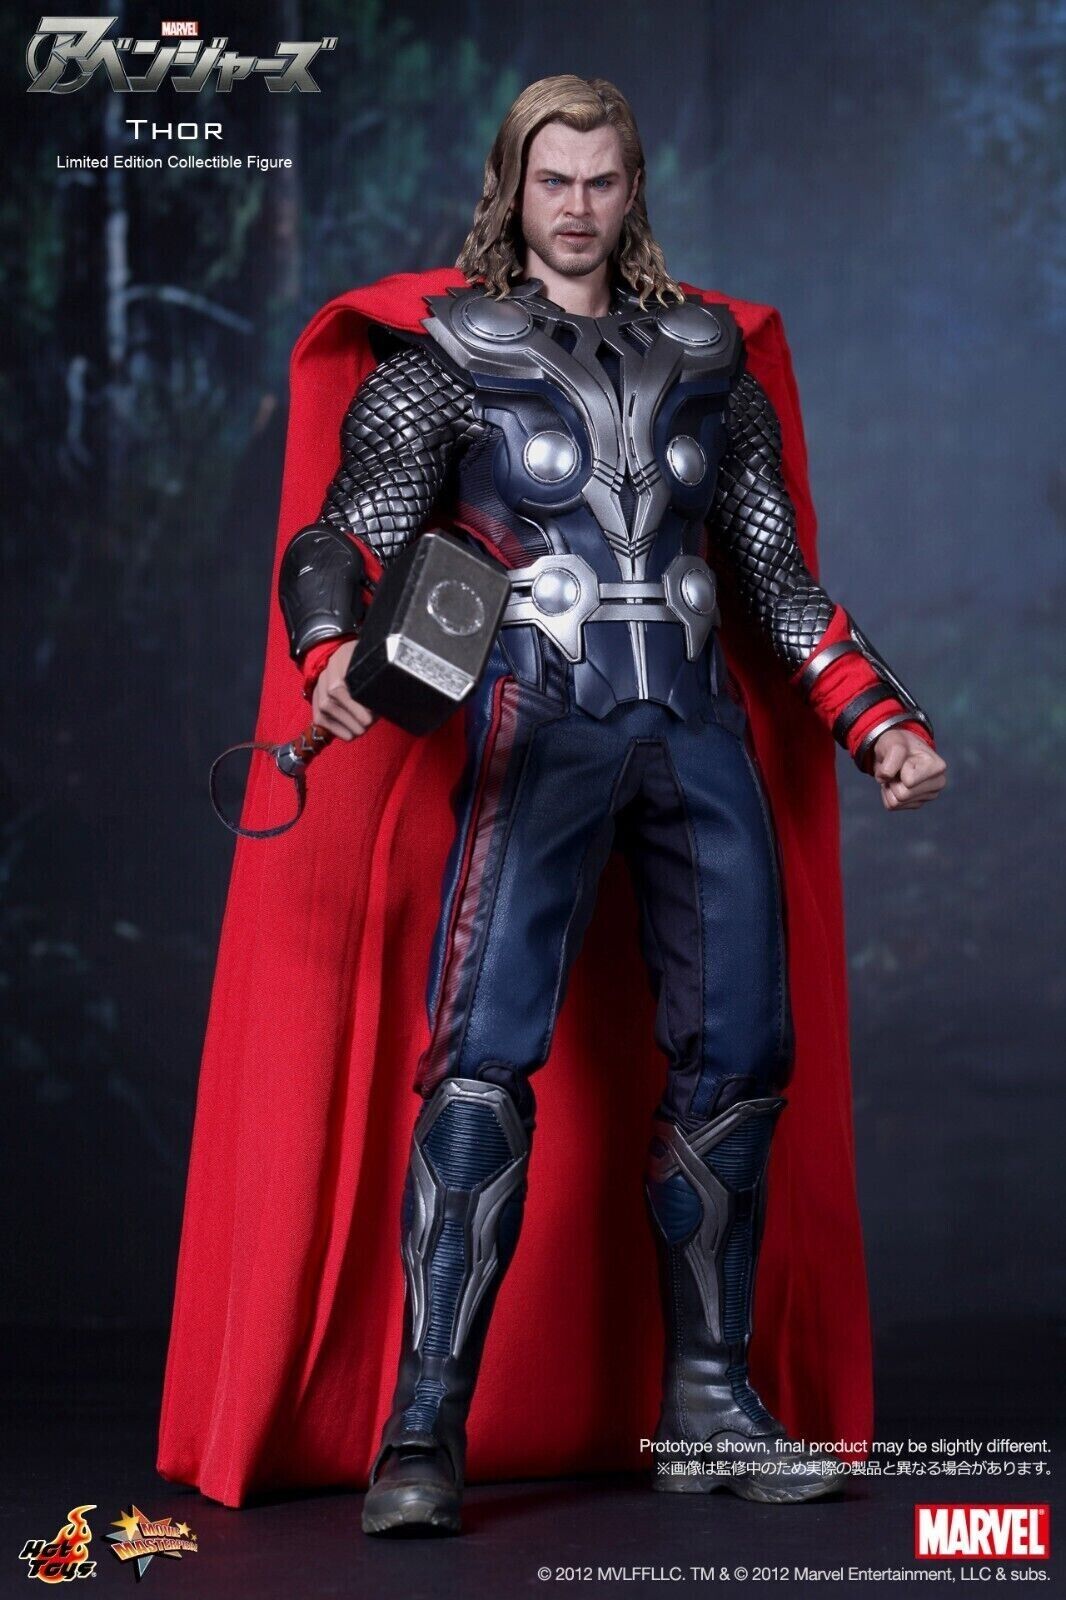 THOR Avengers 1/6 scale action figure